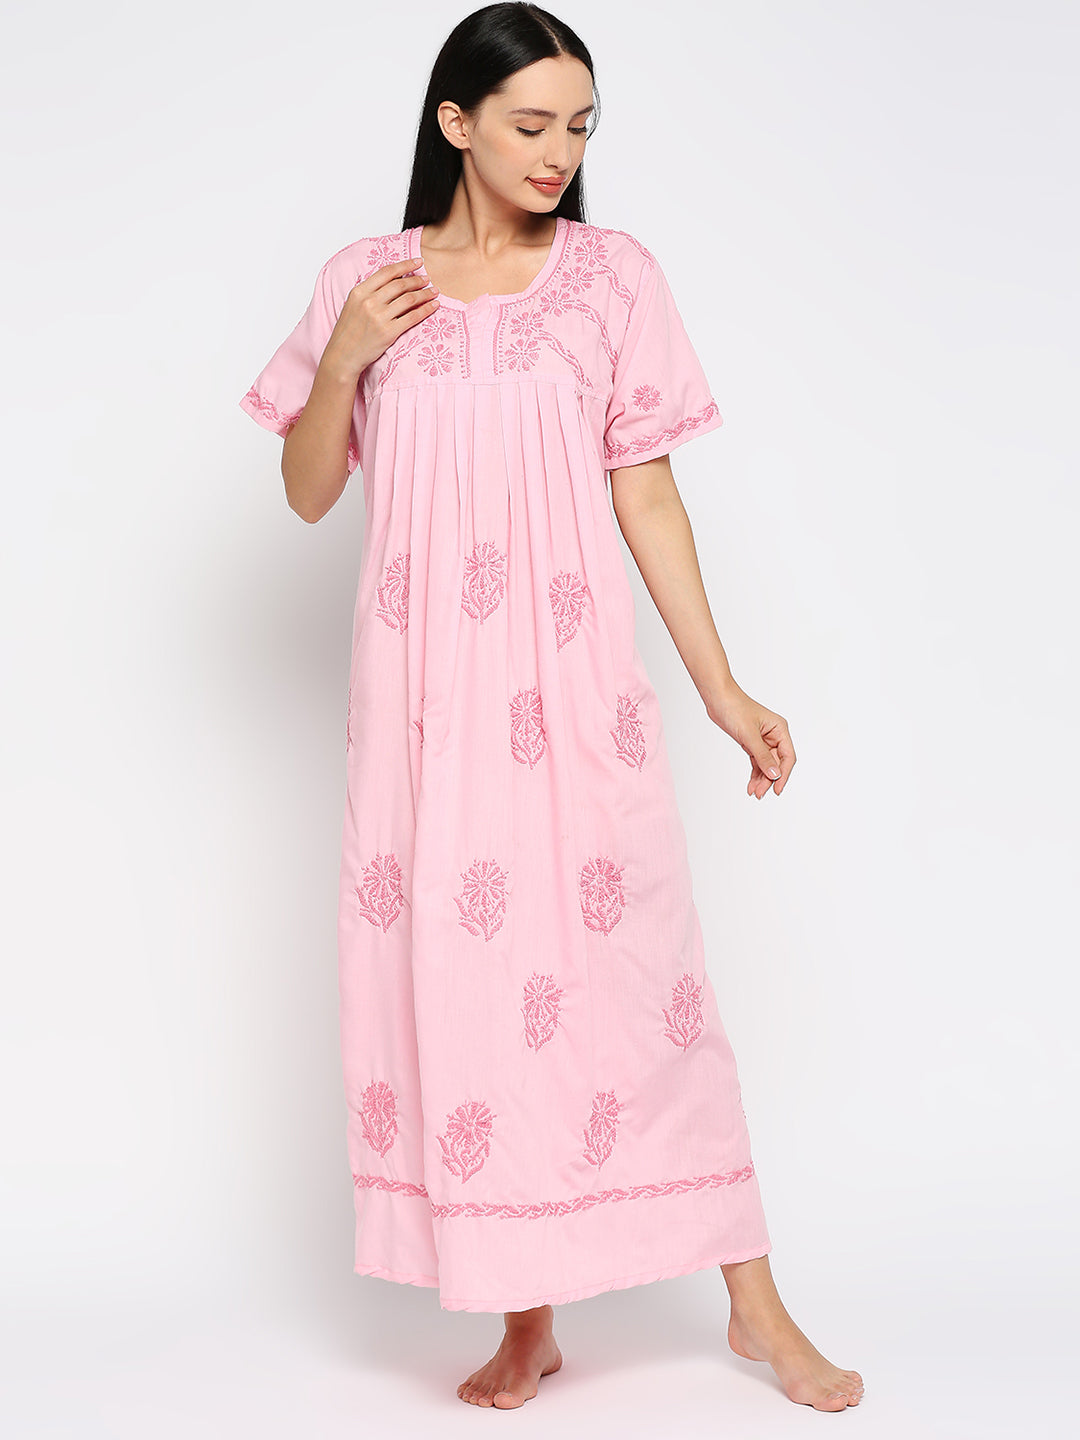 Stitched Round Cotton nighty gown, Packaging Size : 5 Pieces Set, Fabric  Weight : 200-300g/sqm at Rs 250 / piece in Ahmedabad